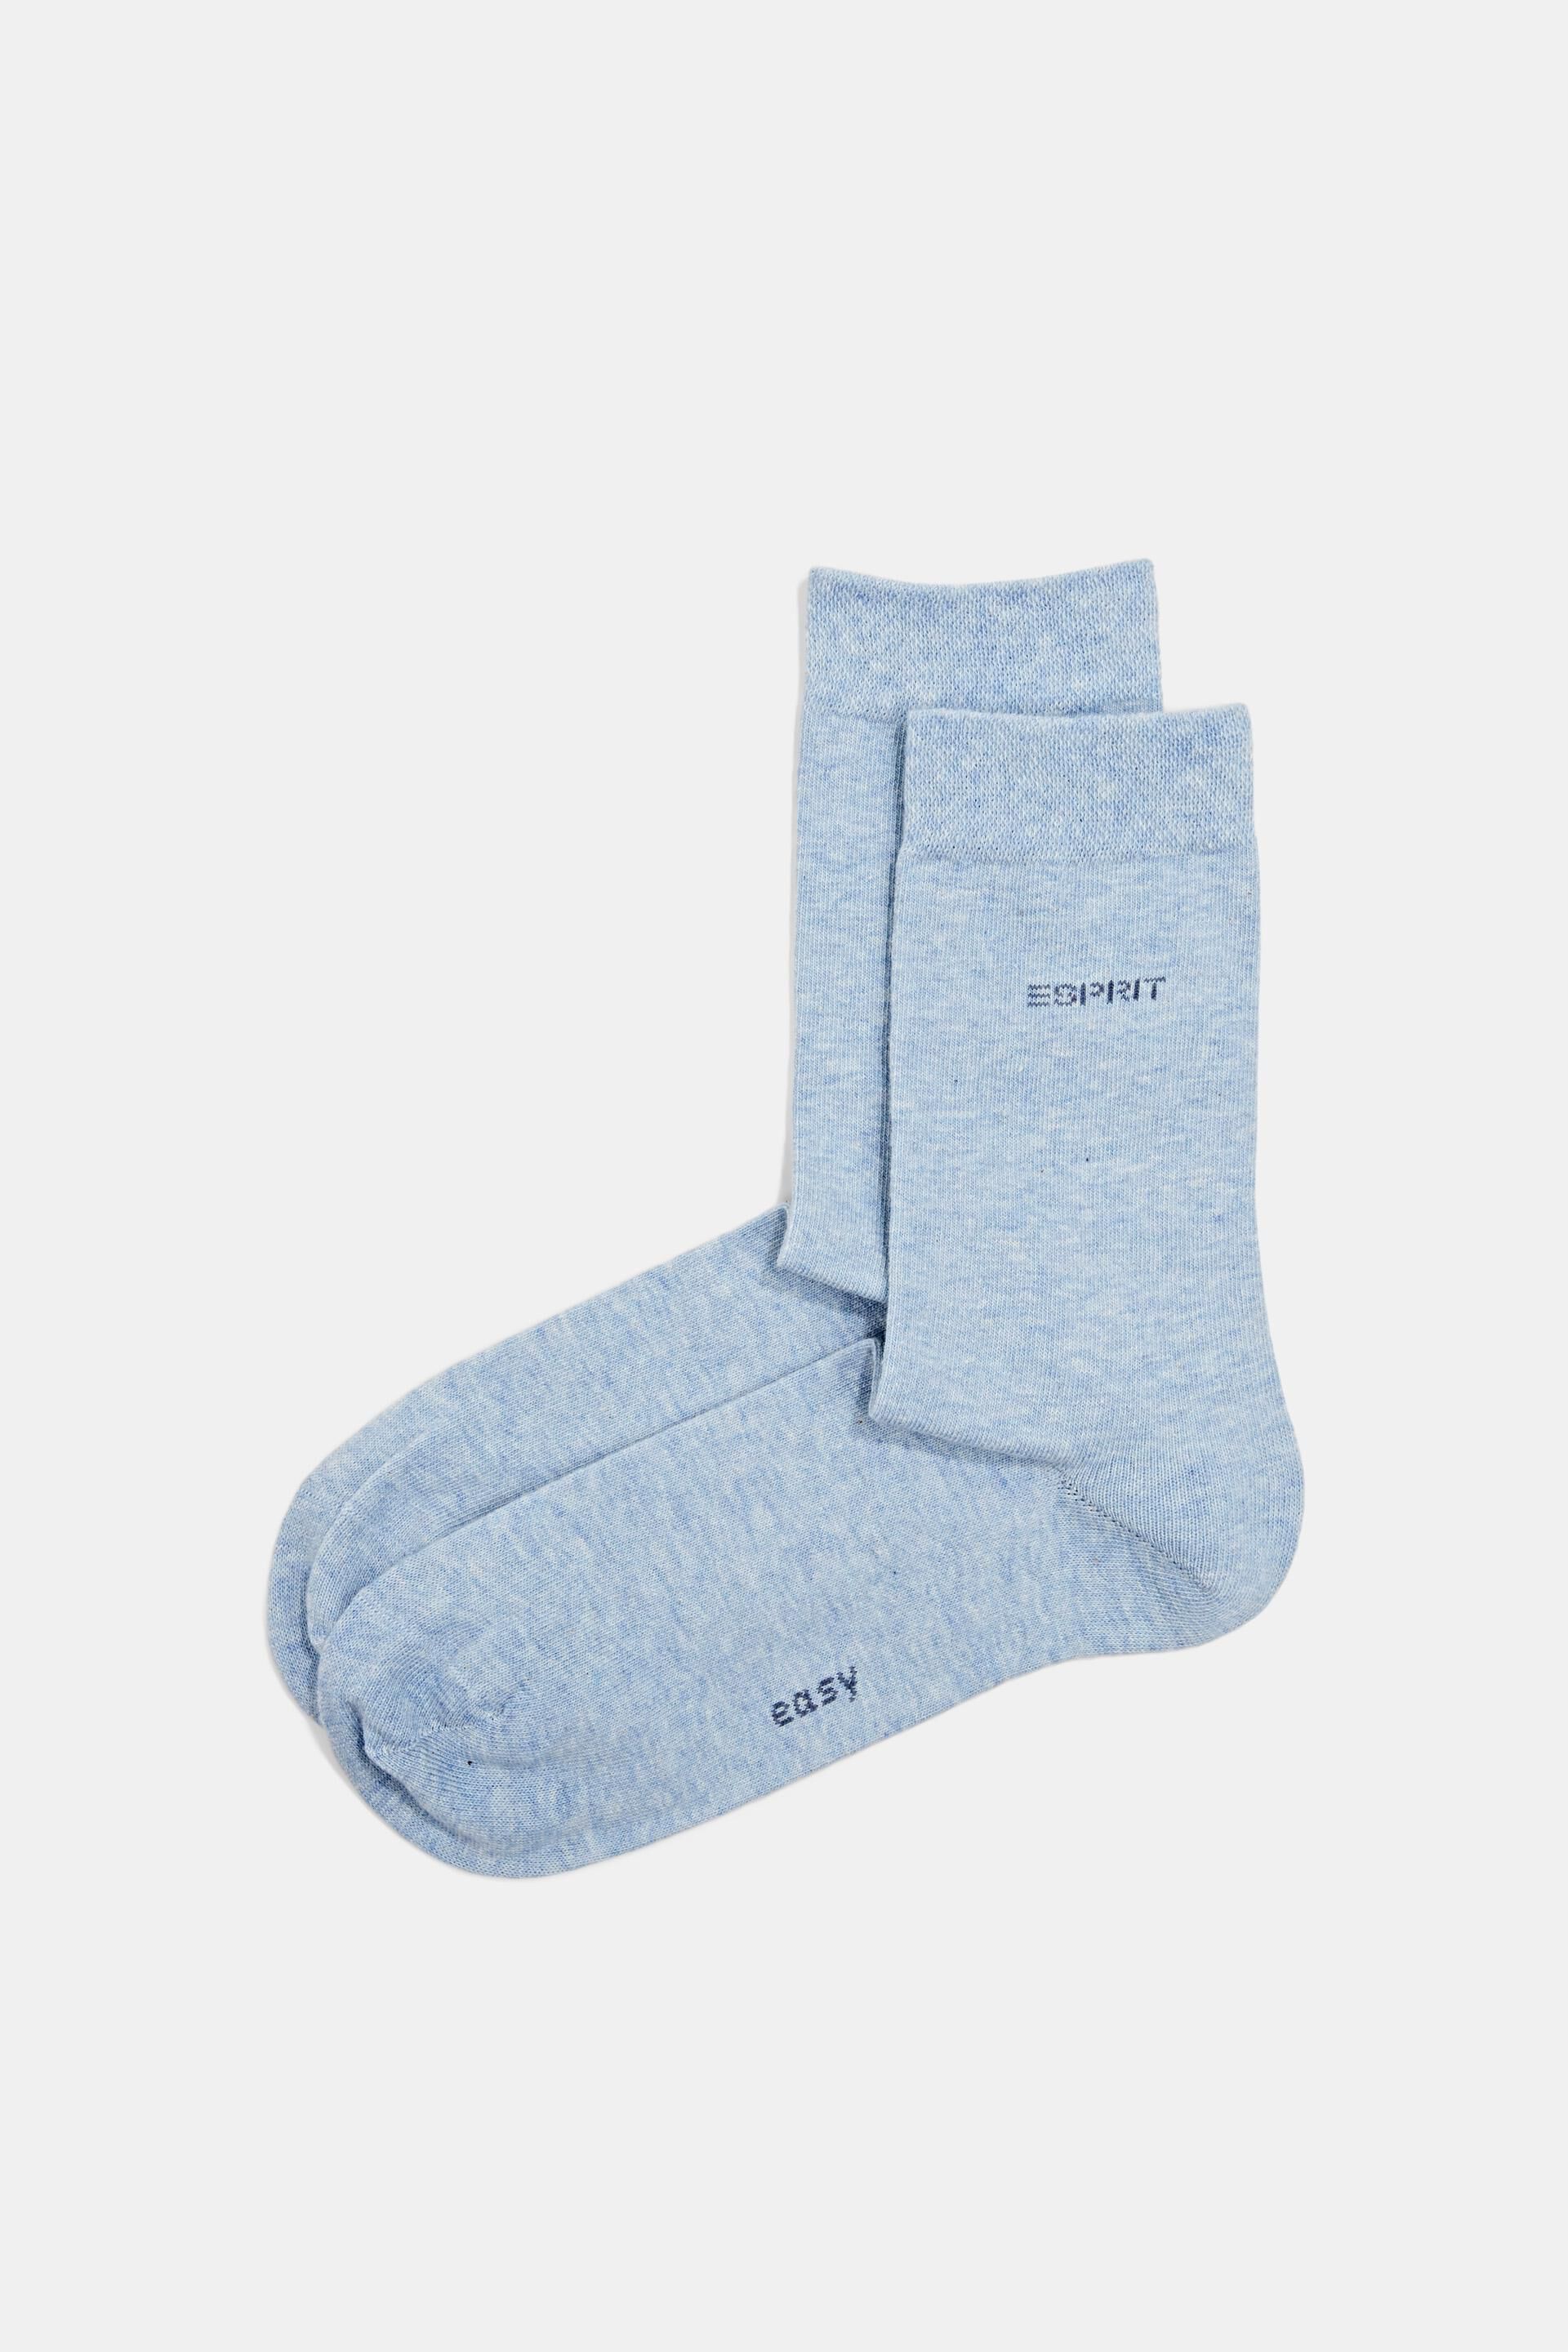 Esprit Online Store Double pack of blended made cotton organic socks